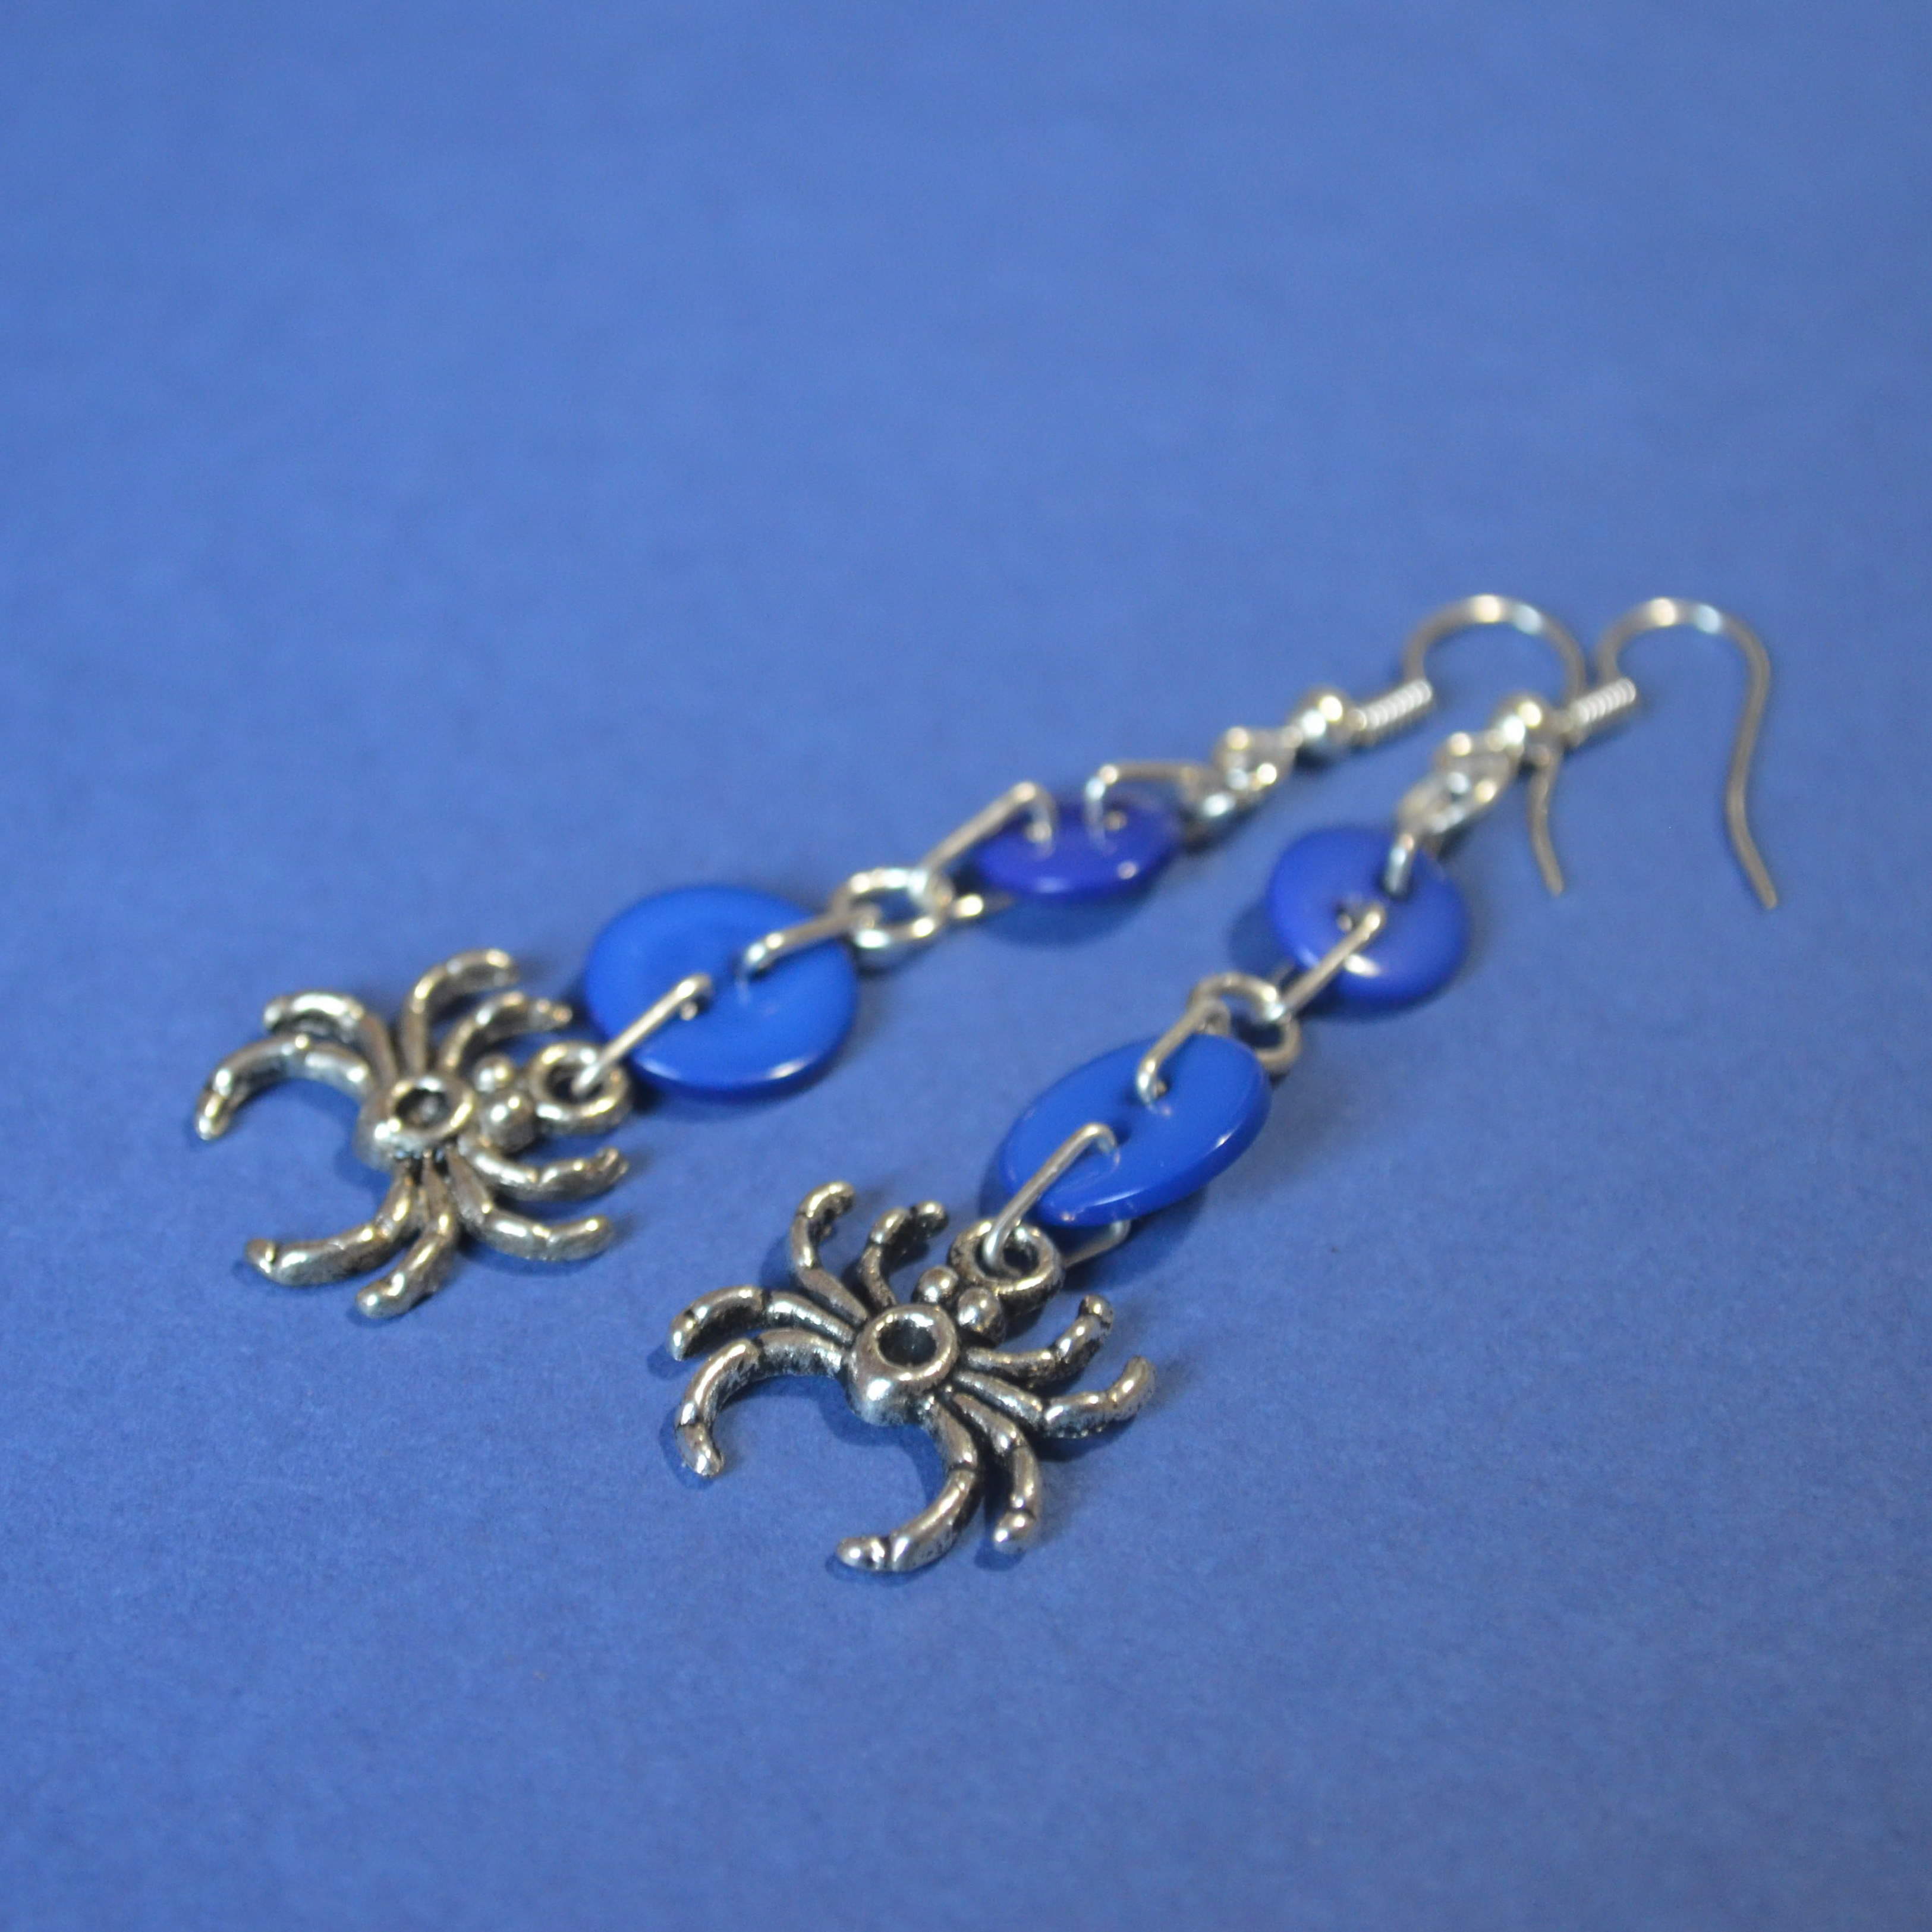 Spider Two Button Charm Earrings